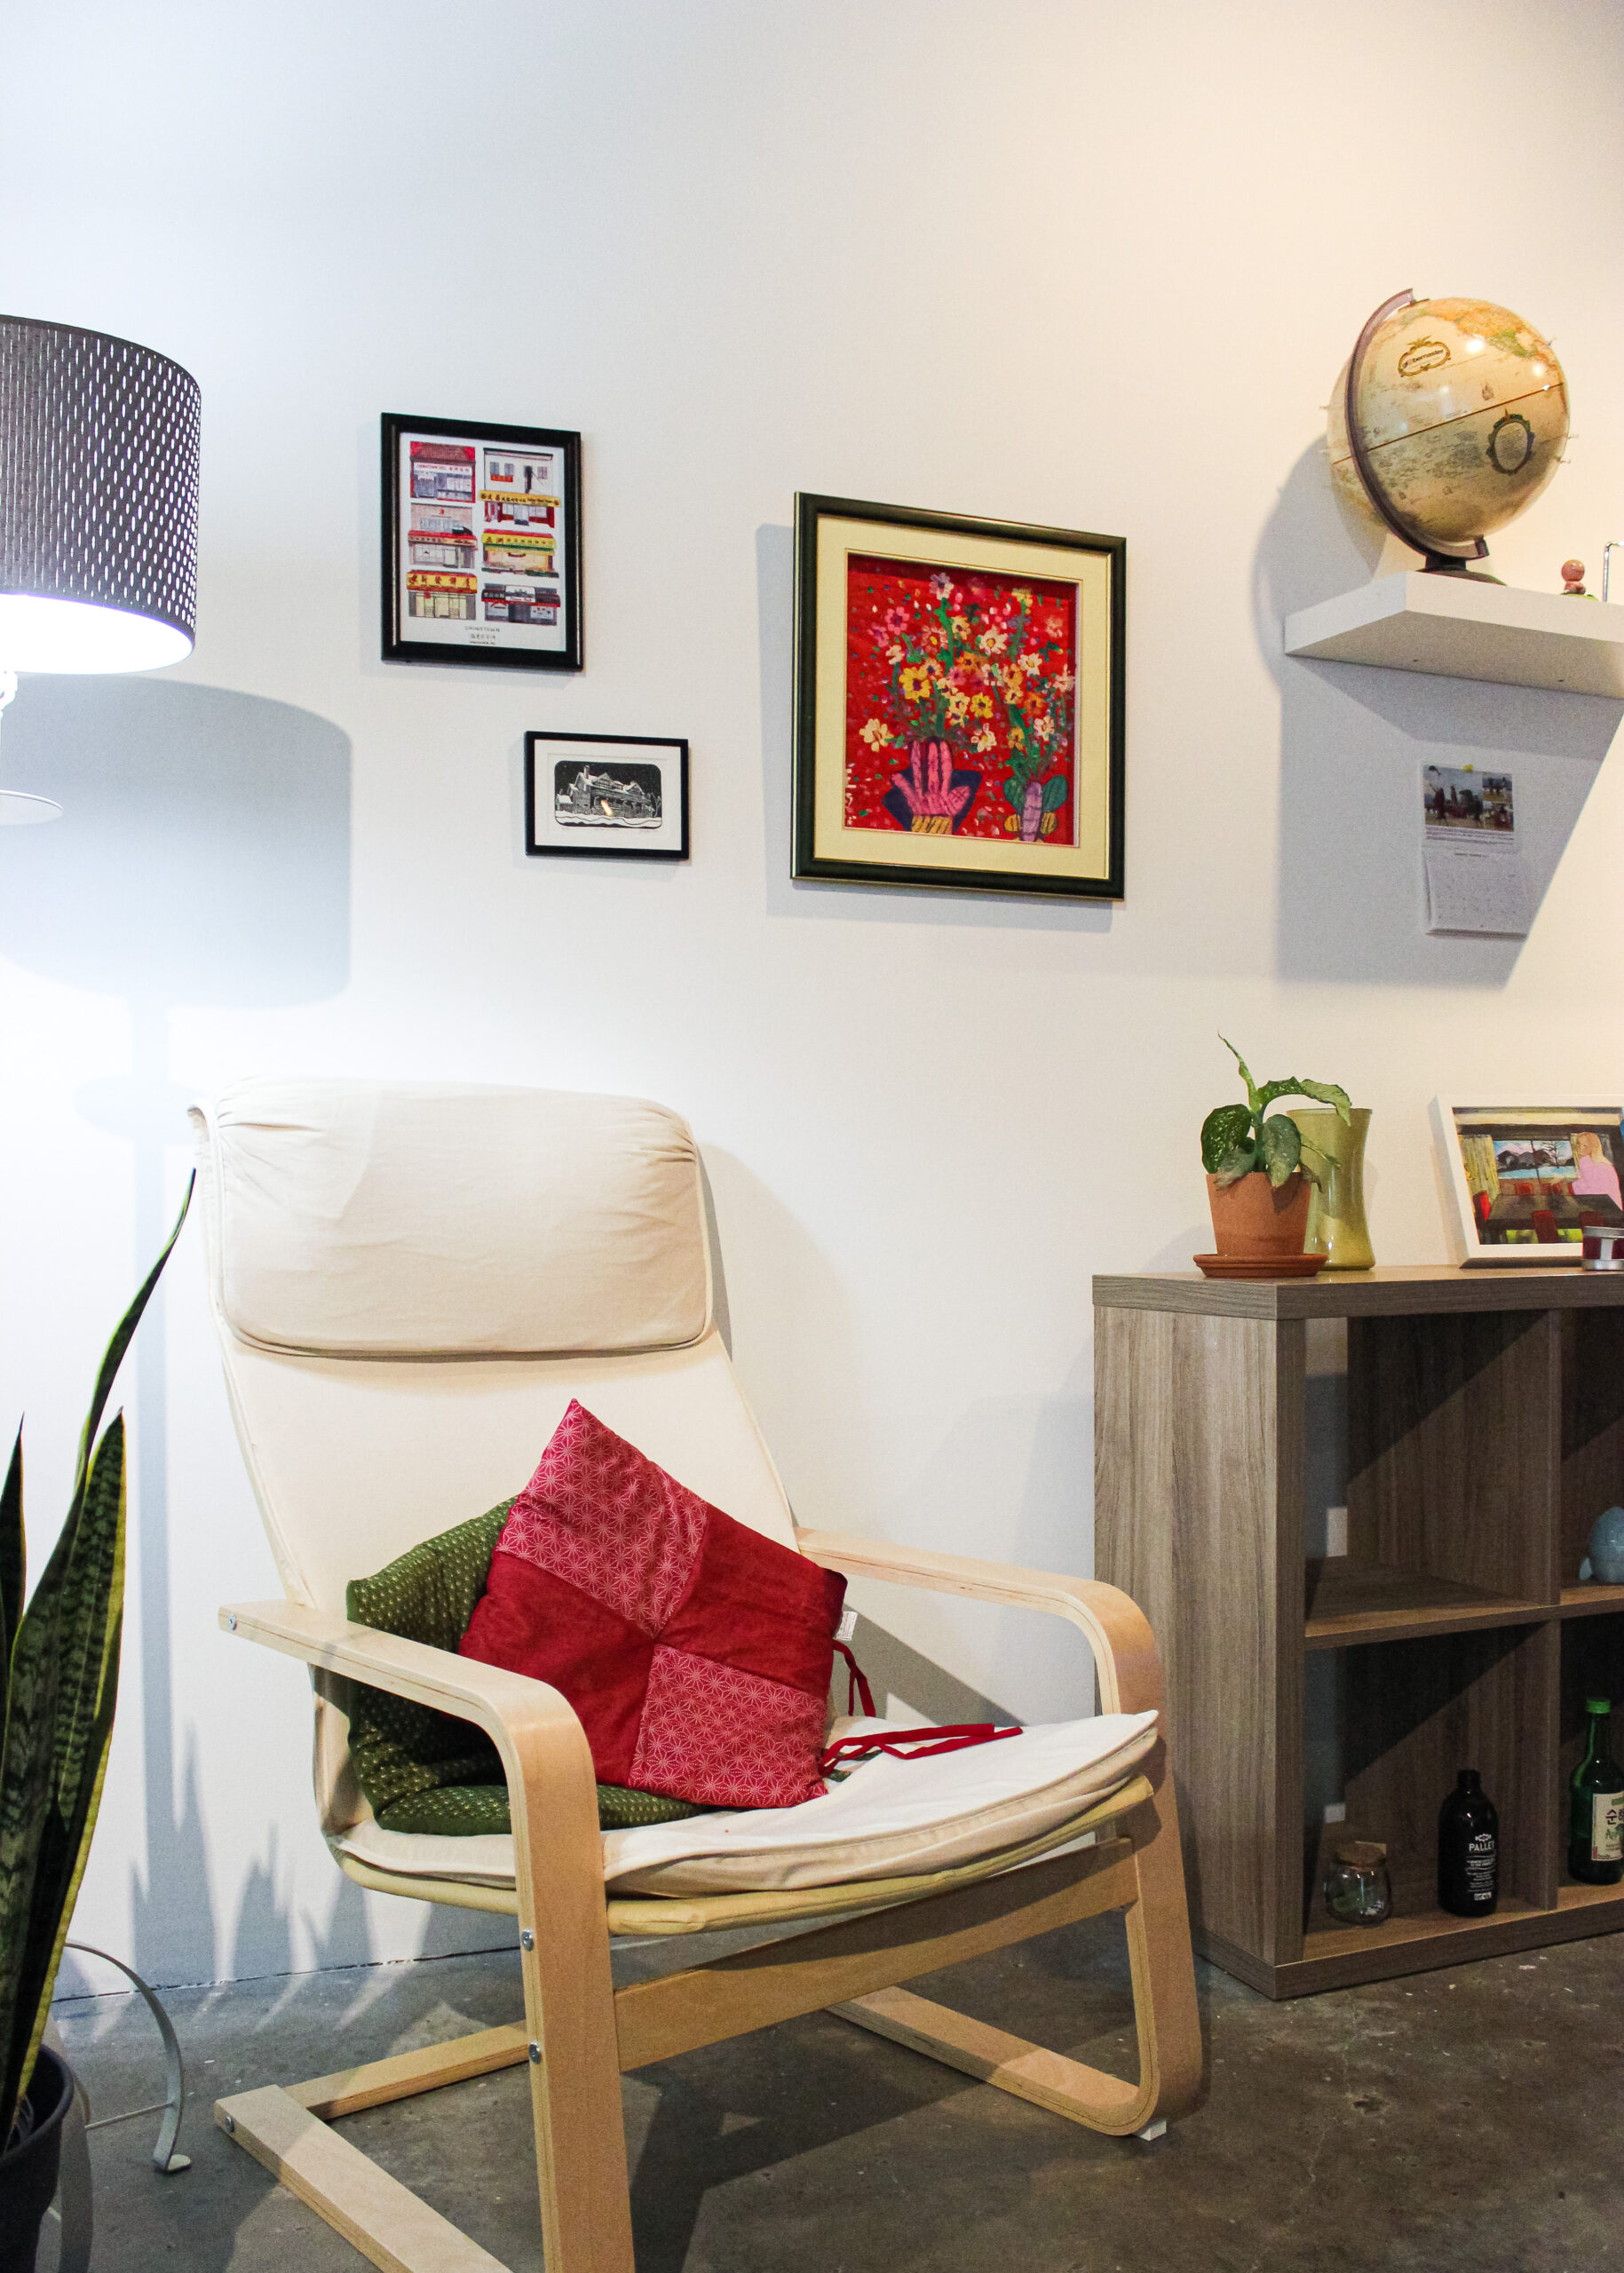 A comfy Ikea armchair against a white wall with framed art prints. To the right side, a storage unit with plants and bottles of sake. To the left, a floor lamp turned on.